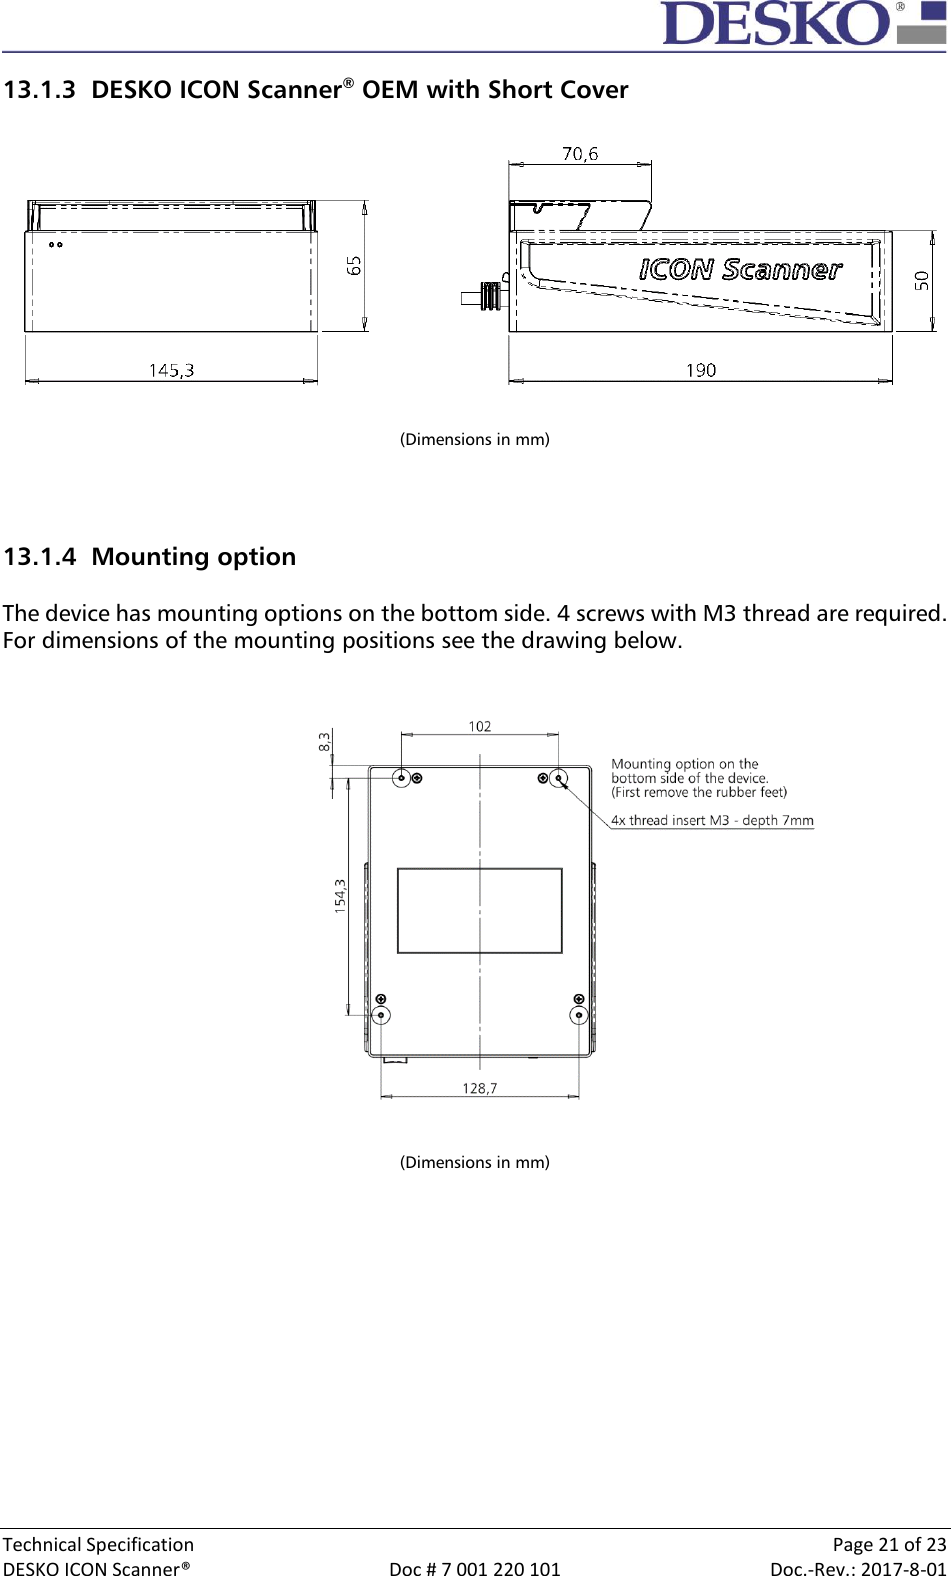  Technical Specification    Page 21 of 23 DESKO ICON Scanner®  Doc # 7 001 220 101  Doc.-Rev.: 2017-8-01  13.1.3 DESKO ICON Scanner® OEM with Short Cover    (Dimensions in mm)   13.1.4 Mounting option  The device has mounting options on the bottom side. 4 screws with M3 thread are required. For dimensions of the mounting positions see the drawing below.                    (Dimensions in mm)      